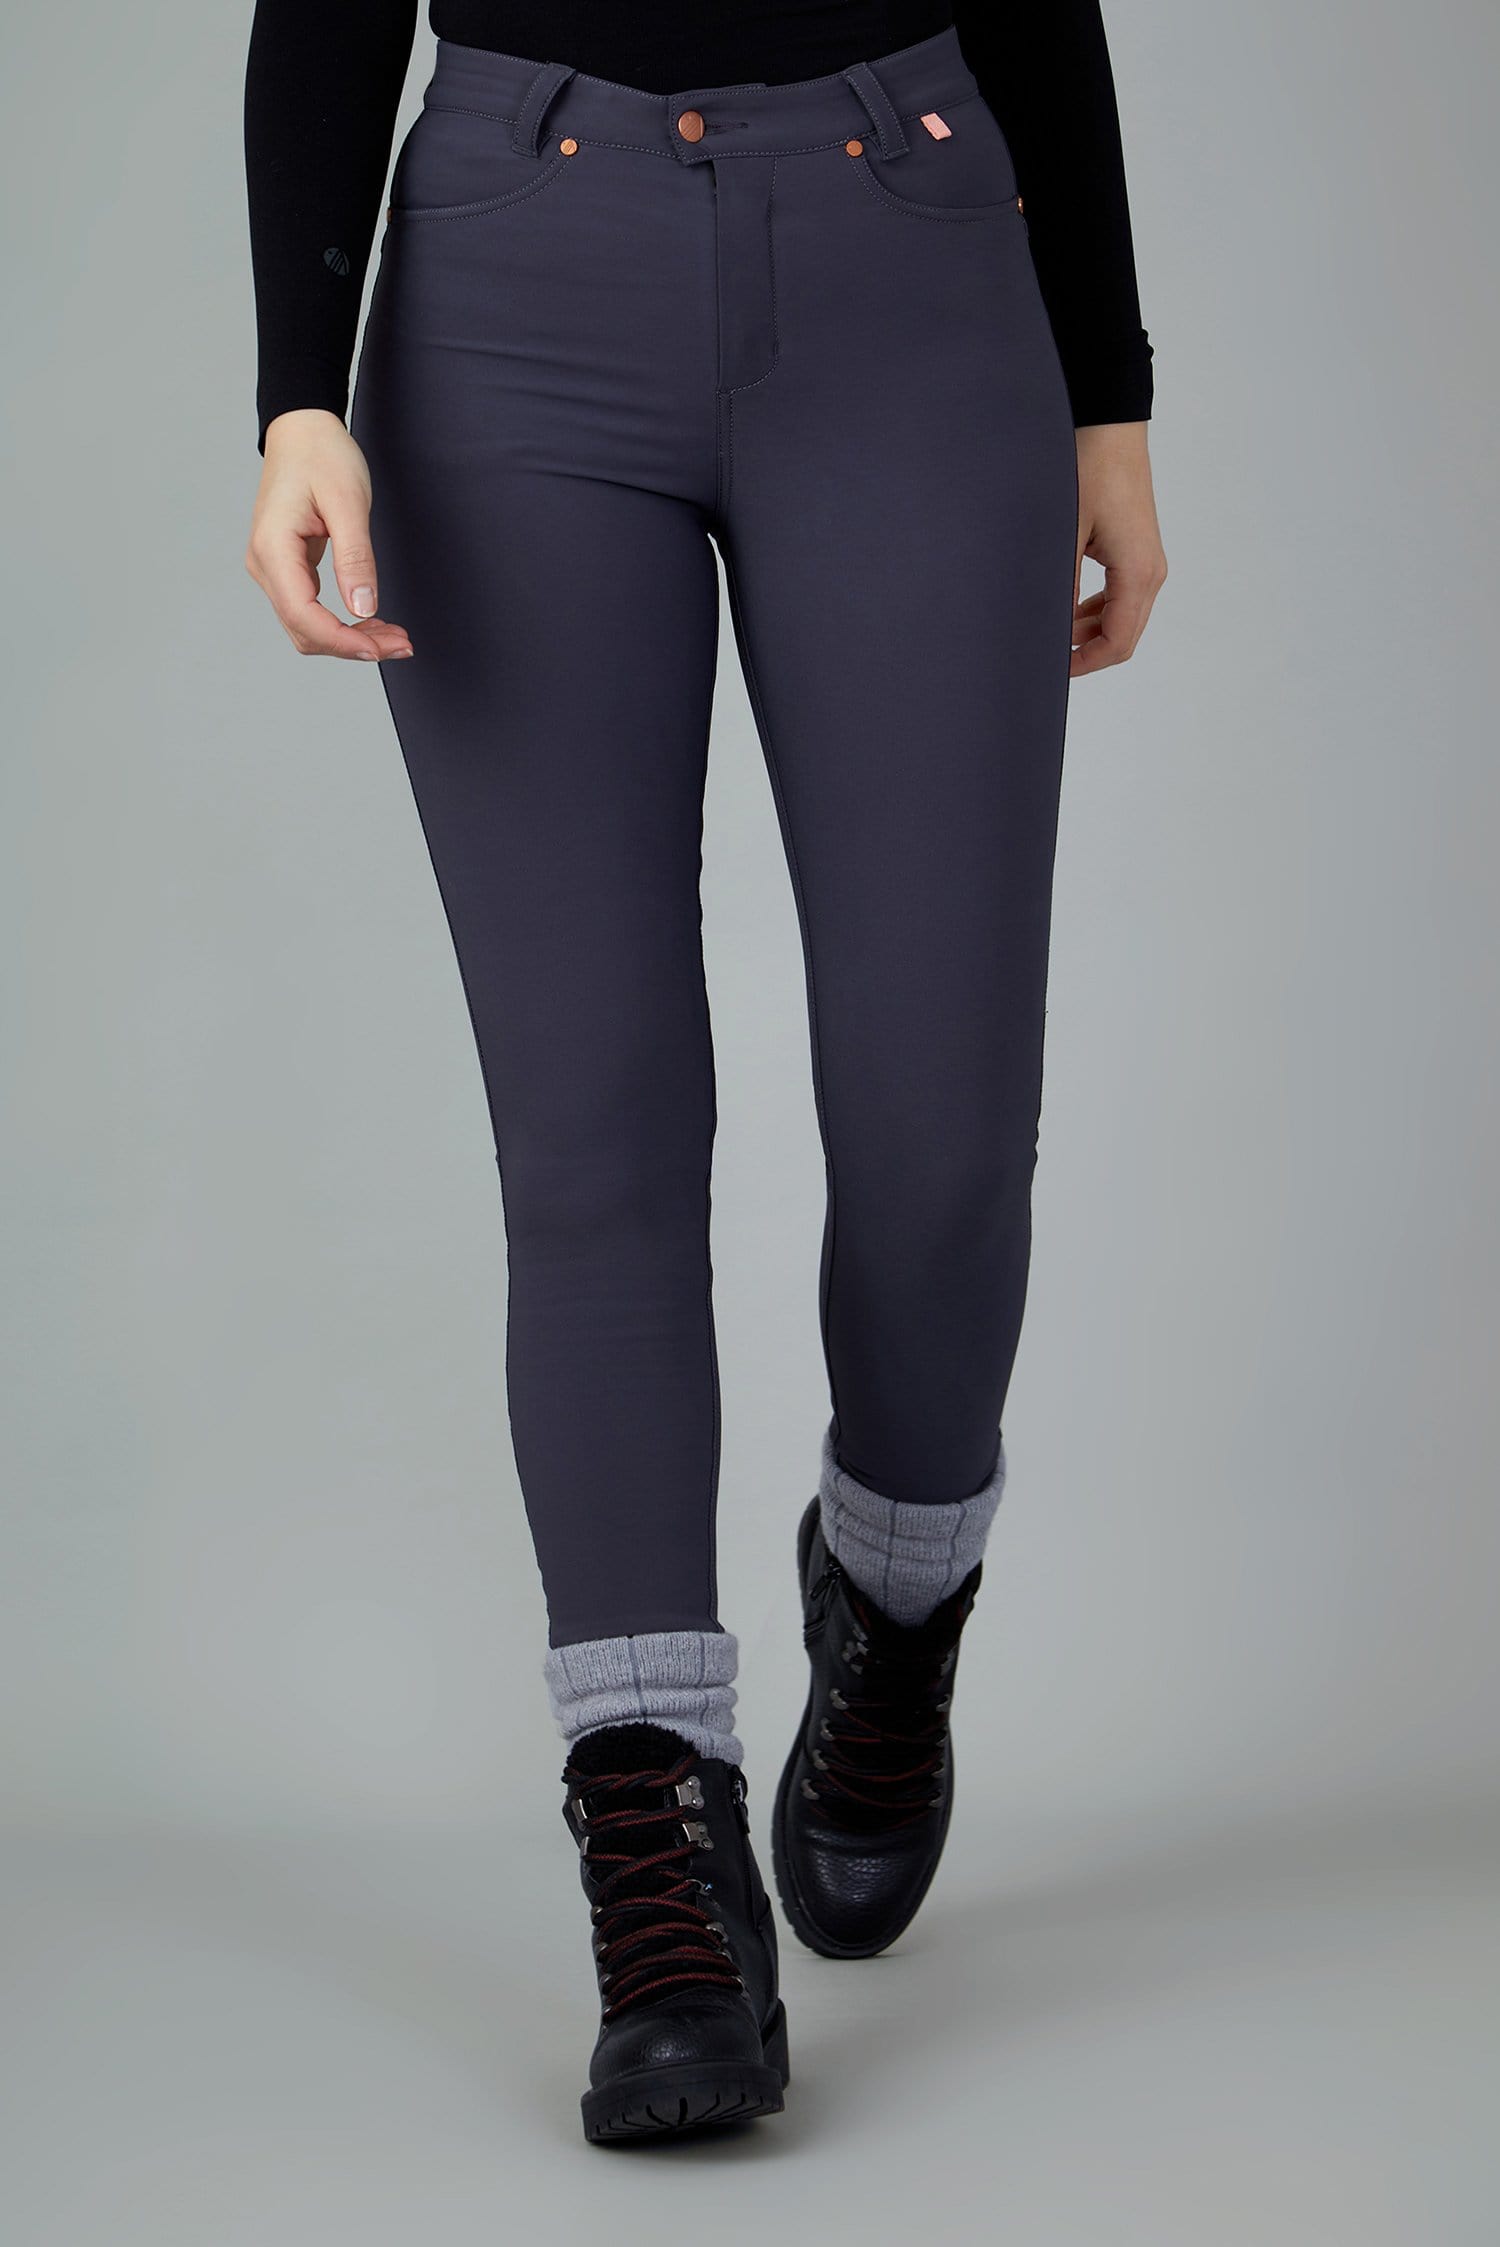 The Aventurite Stretch Skinny Outdoor Trousers - Obsidian - 38l / Uk20 - Womens - Acai Outdoorwear